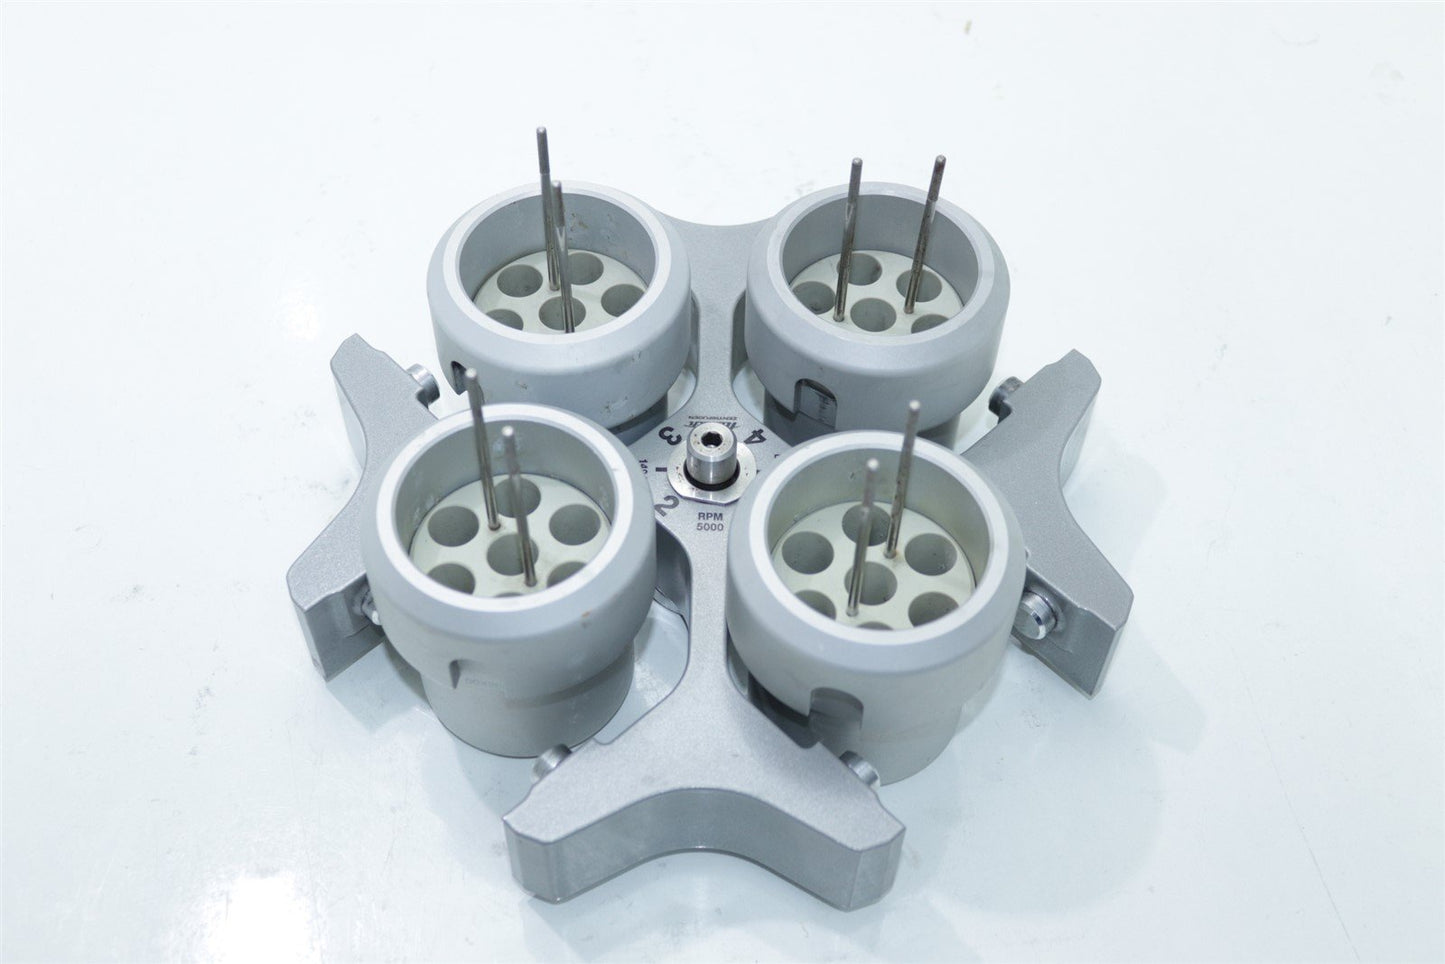 Hettich U 320 Benchtop Centrifuge Swing Out Rotor + 4 Buckets + Tube Adapters